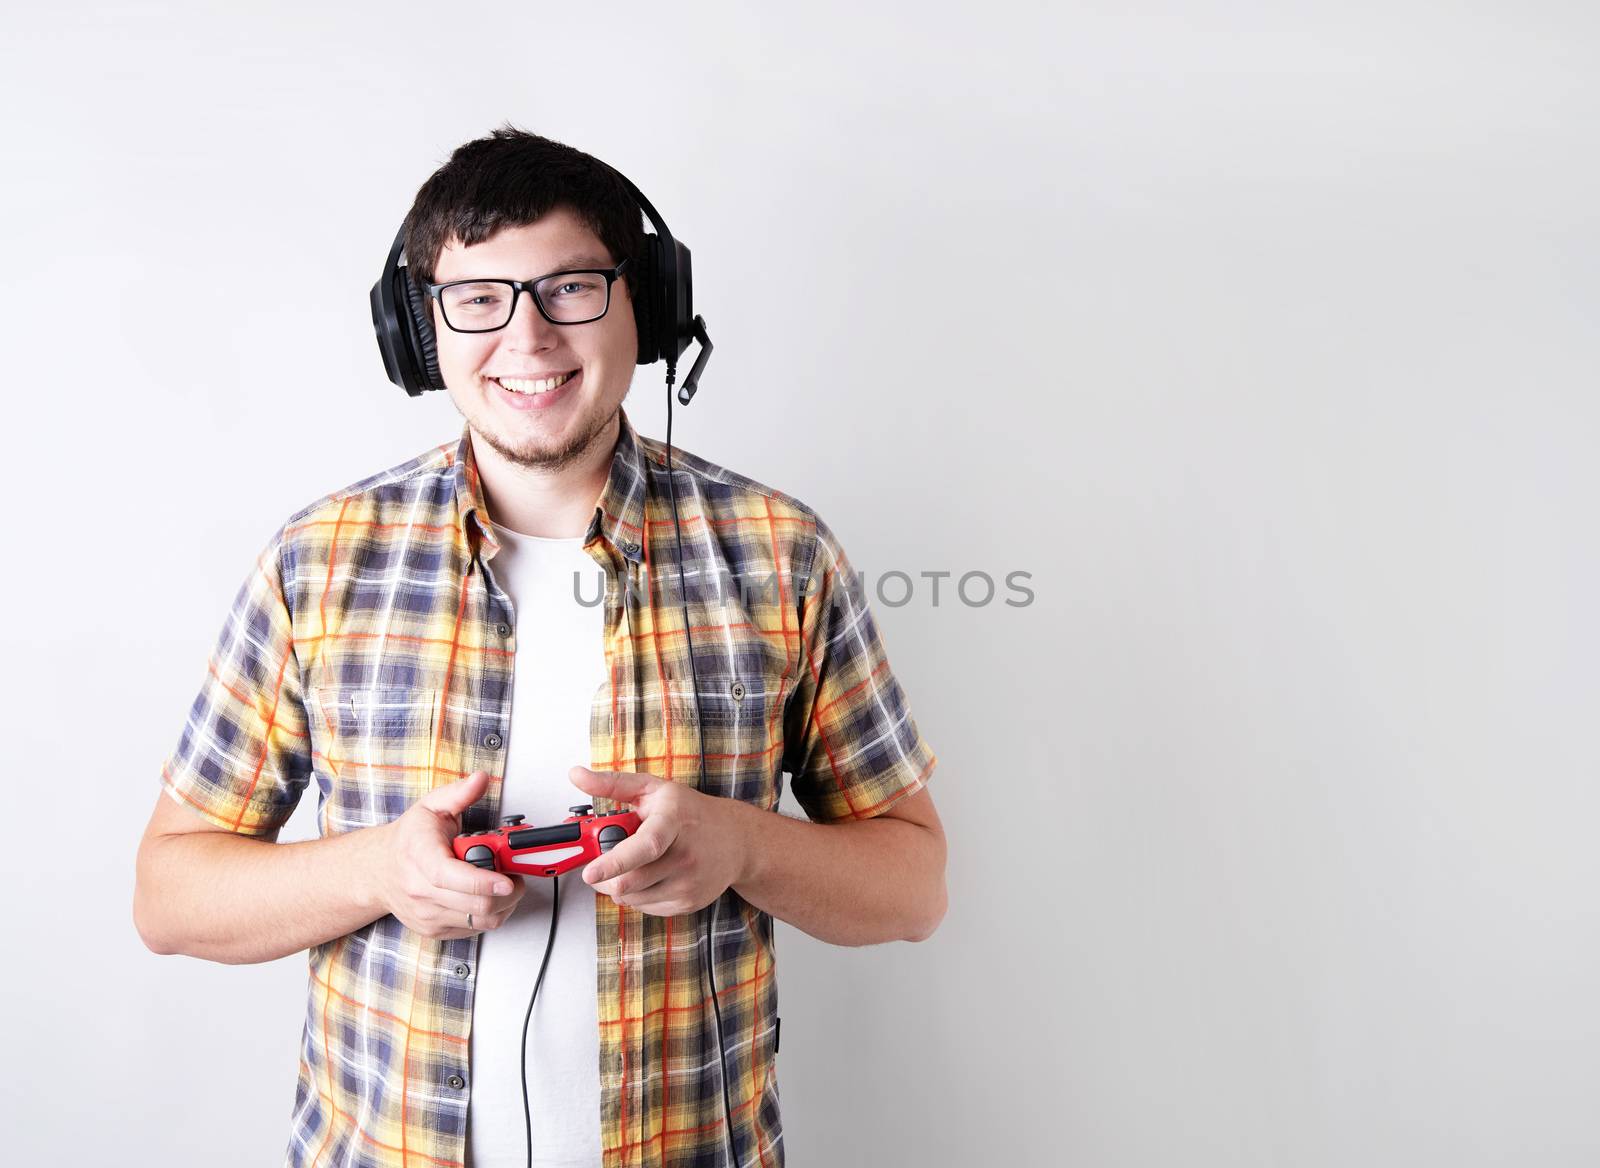 Smiling young man playing video games holding a joystick isolated on gray background by Desperada